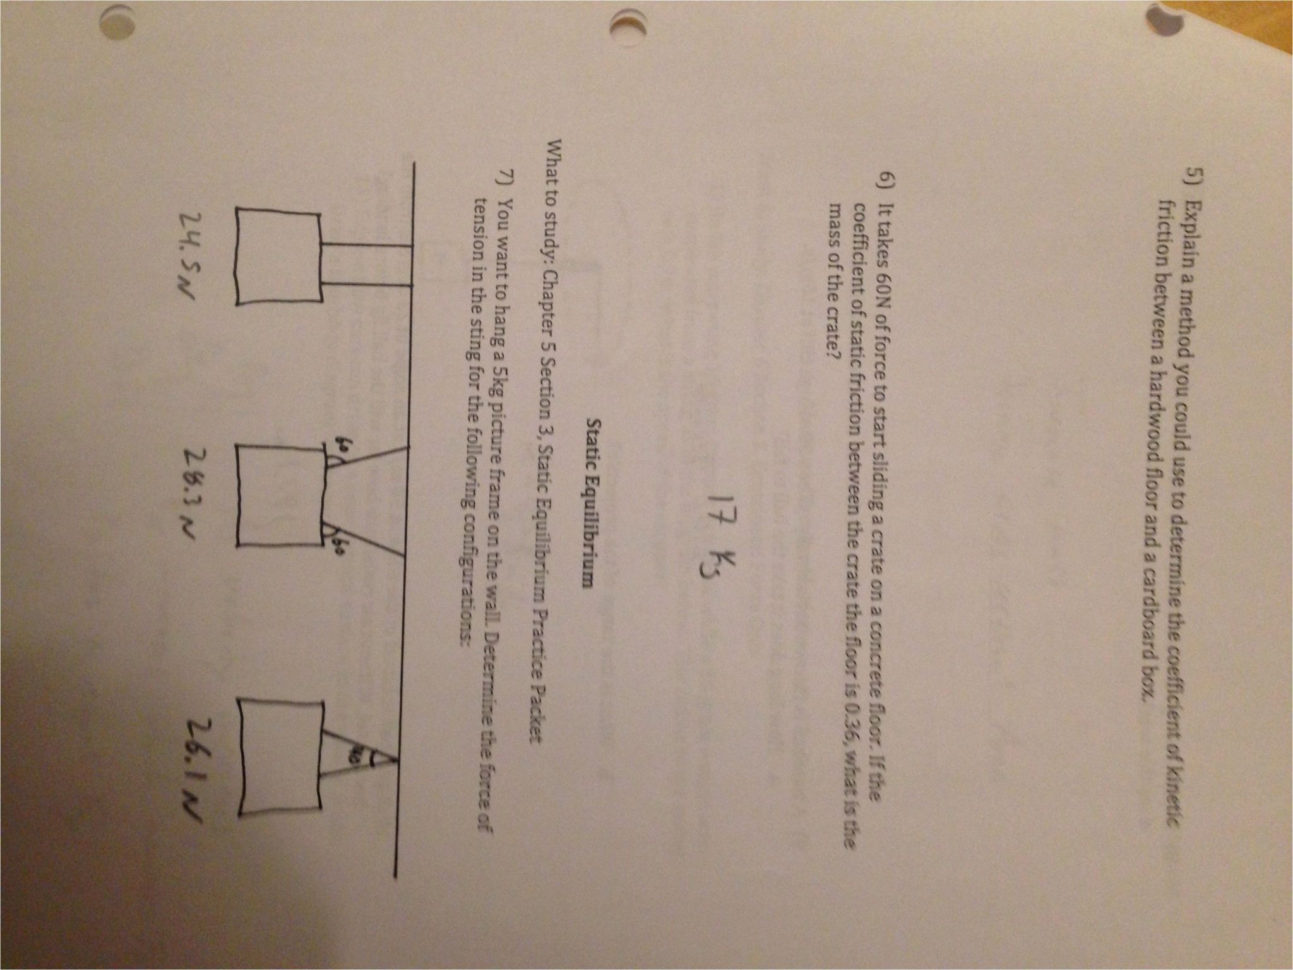 Coefficient Of Friction Worksheet Answers